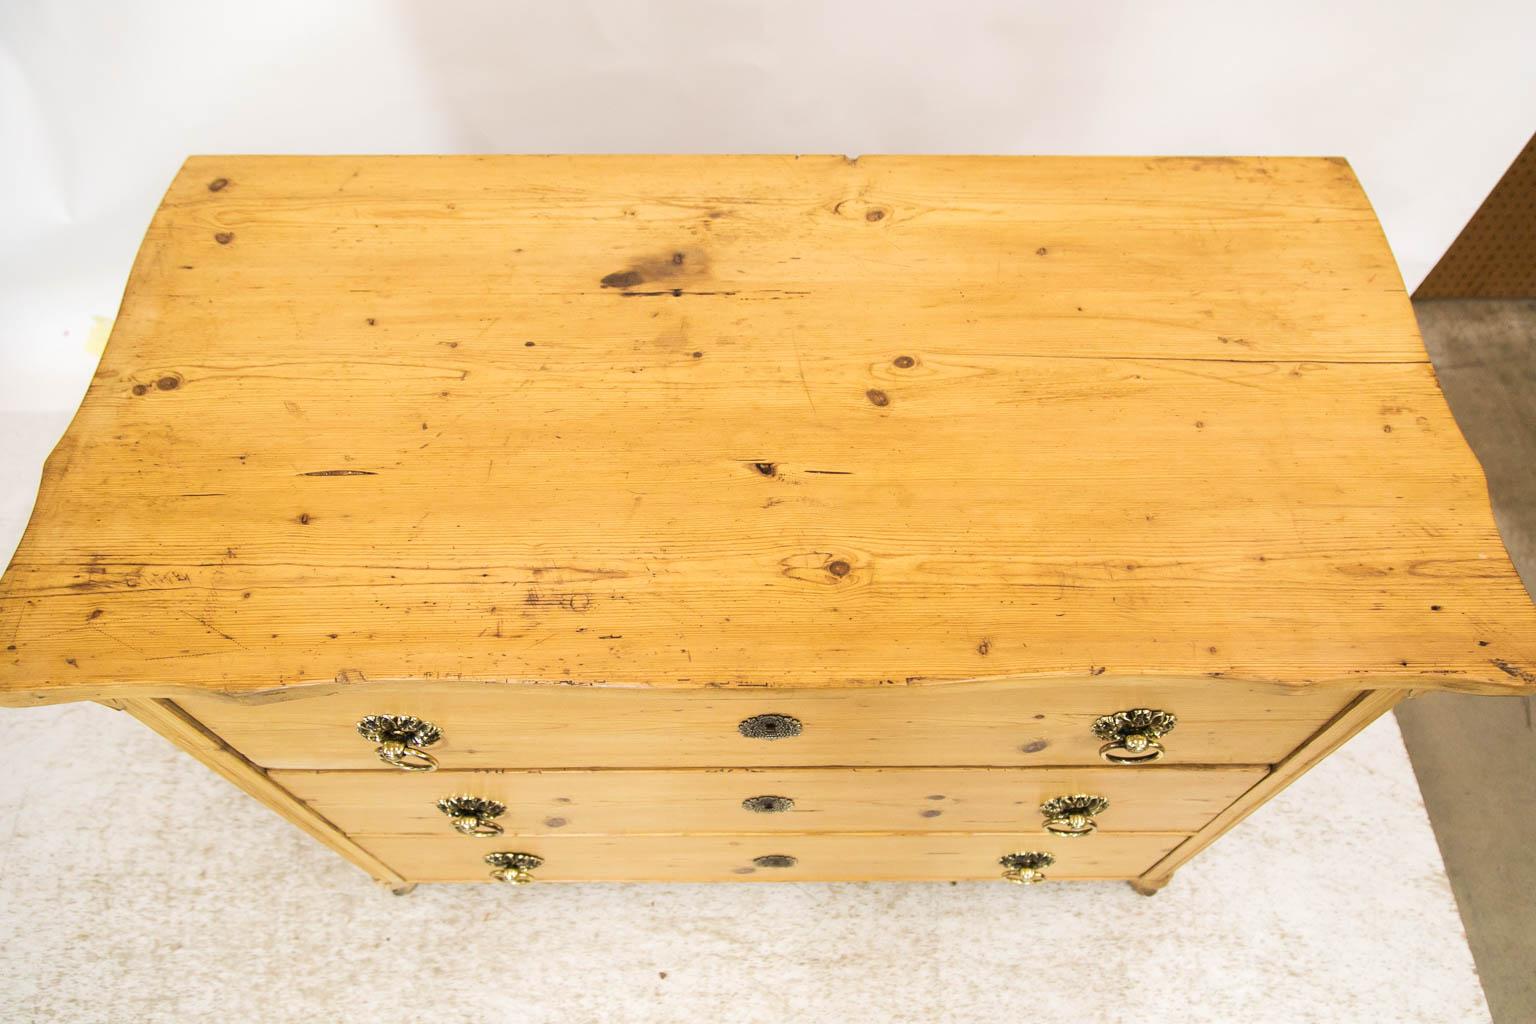 This chest has a shaped top with fluted chamfered stiles with a stylized acanthus bracket at the top terminating in corresponding carved feet. There is a coved molding supporting the top on all three sides. The locks are original. Hardware is later.